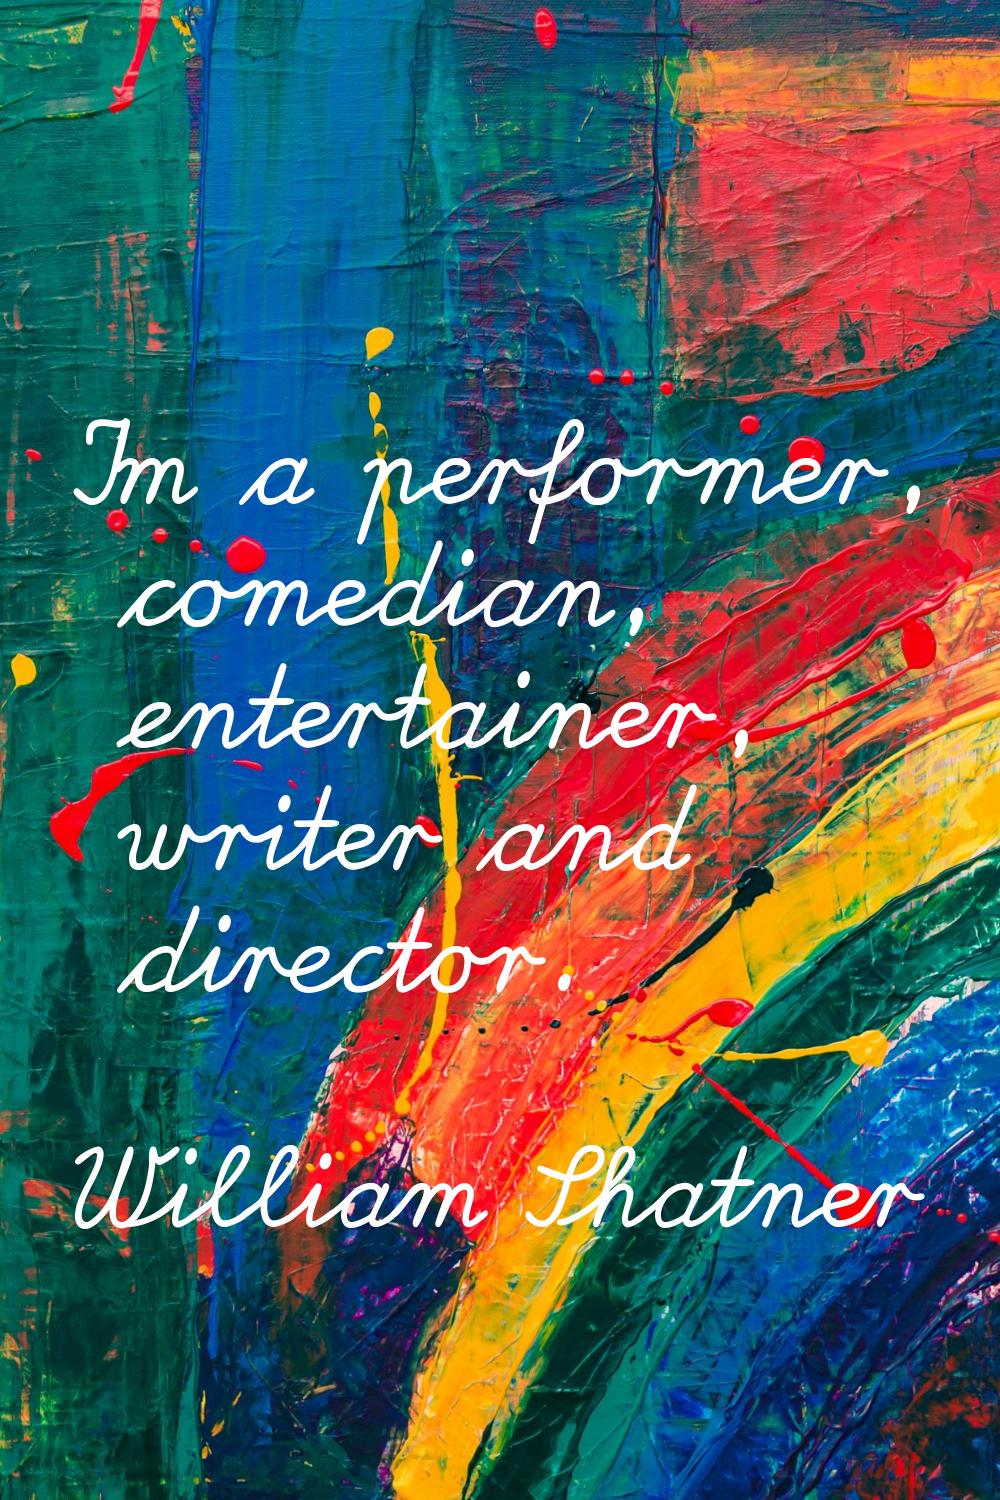 I'm a performer, comedian, entertainer, writer and director.